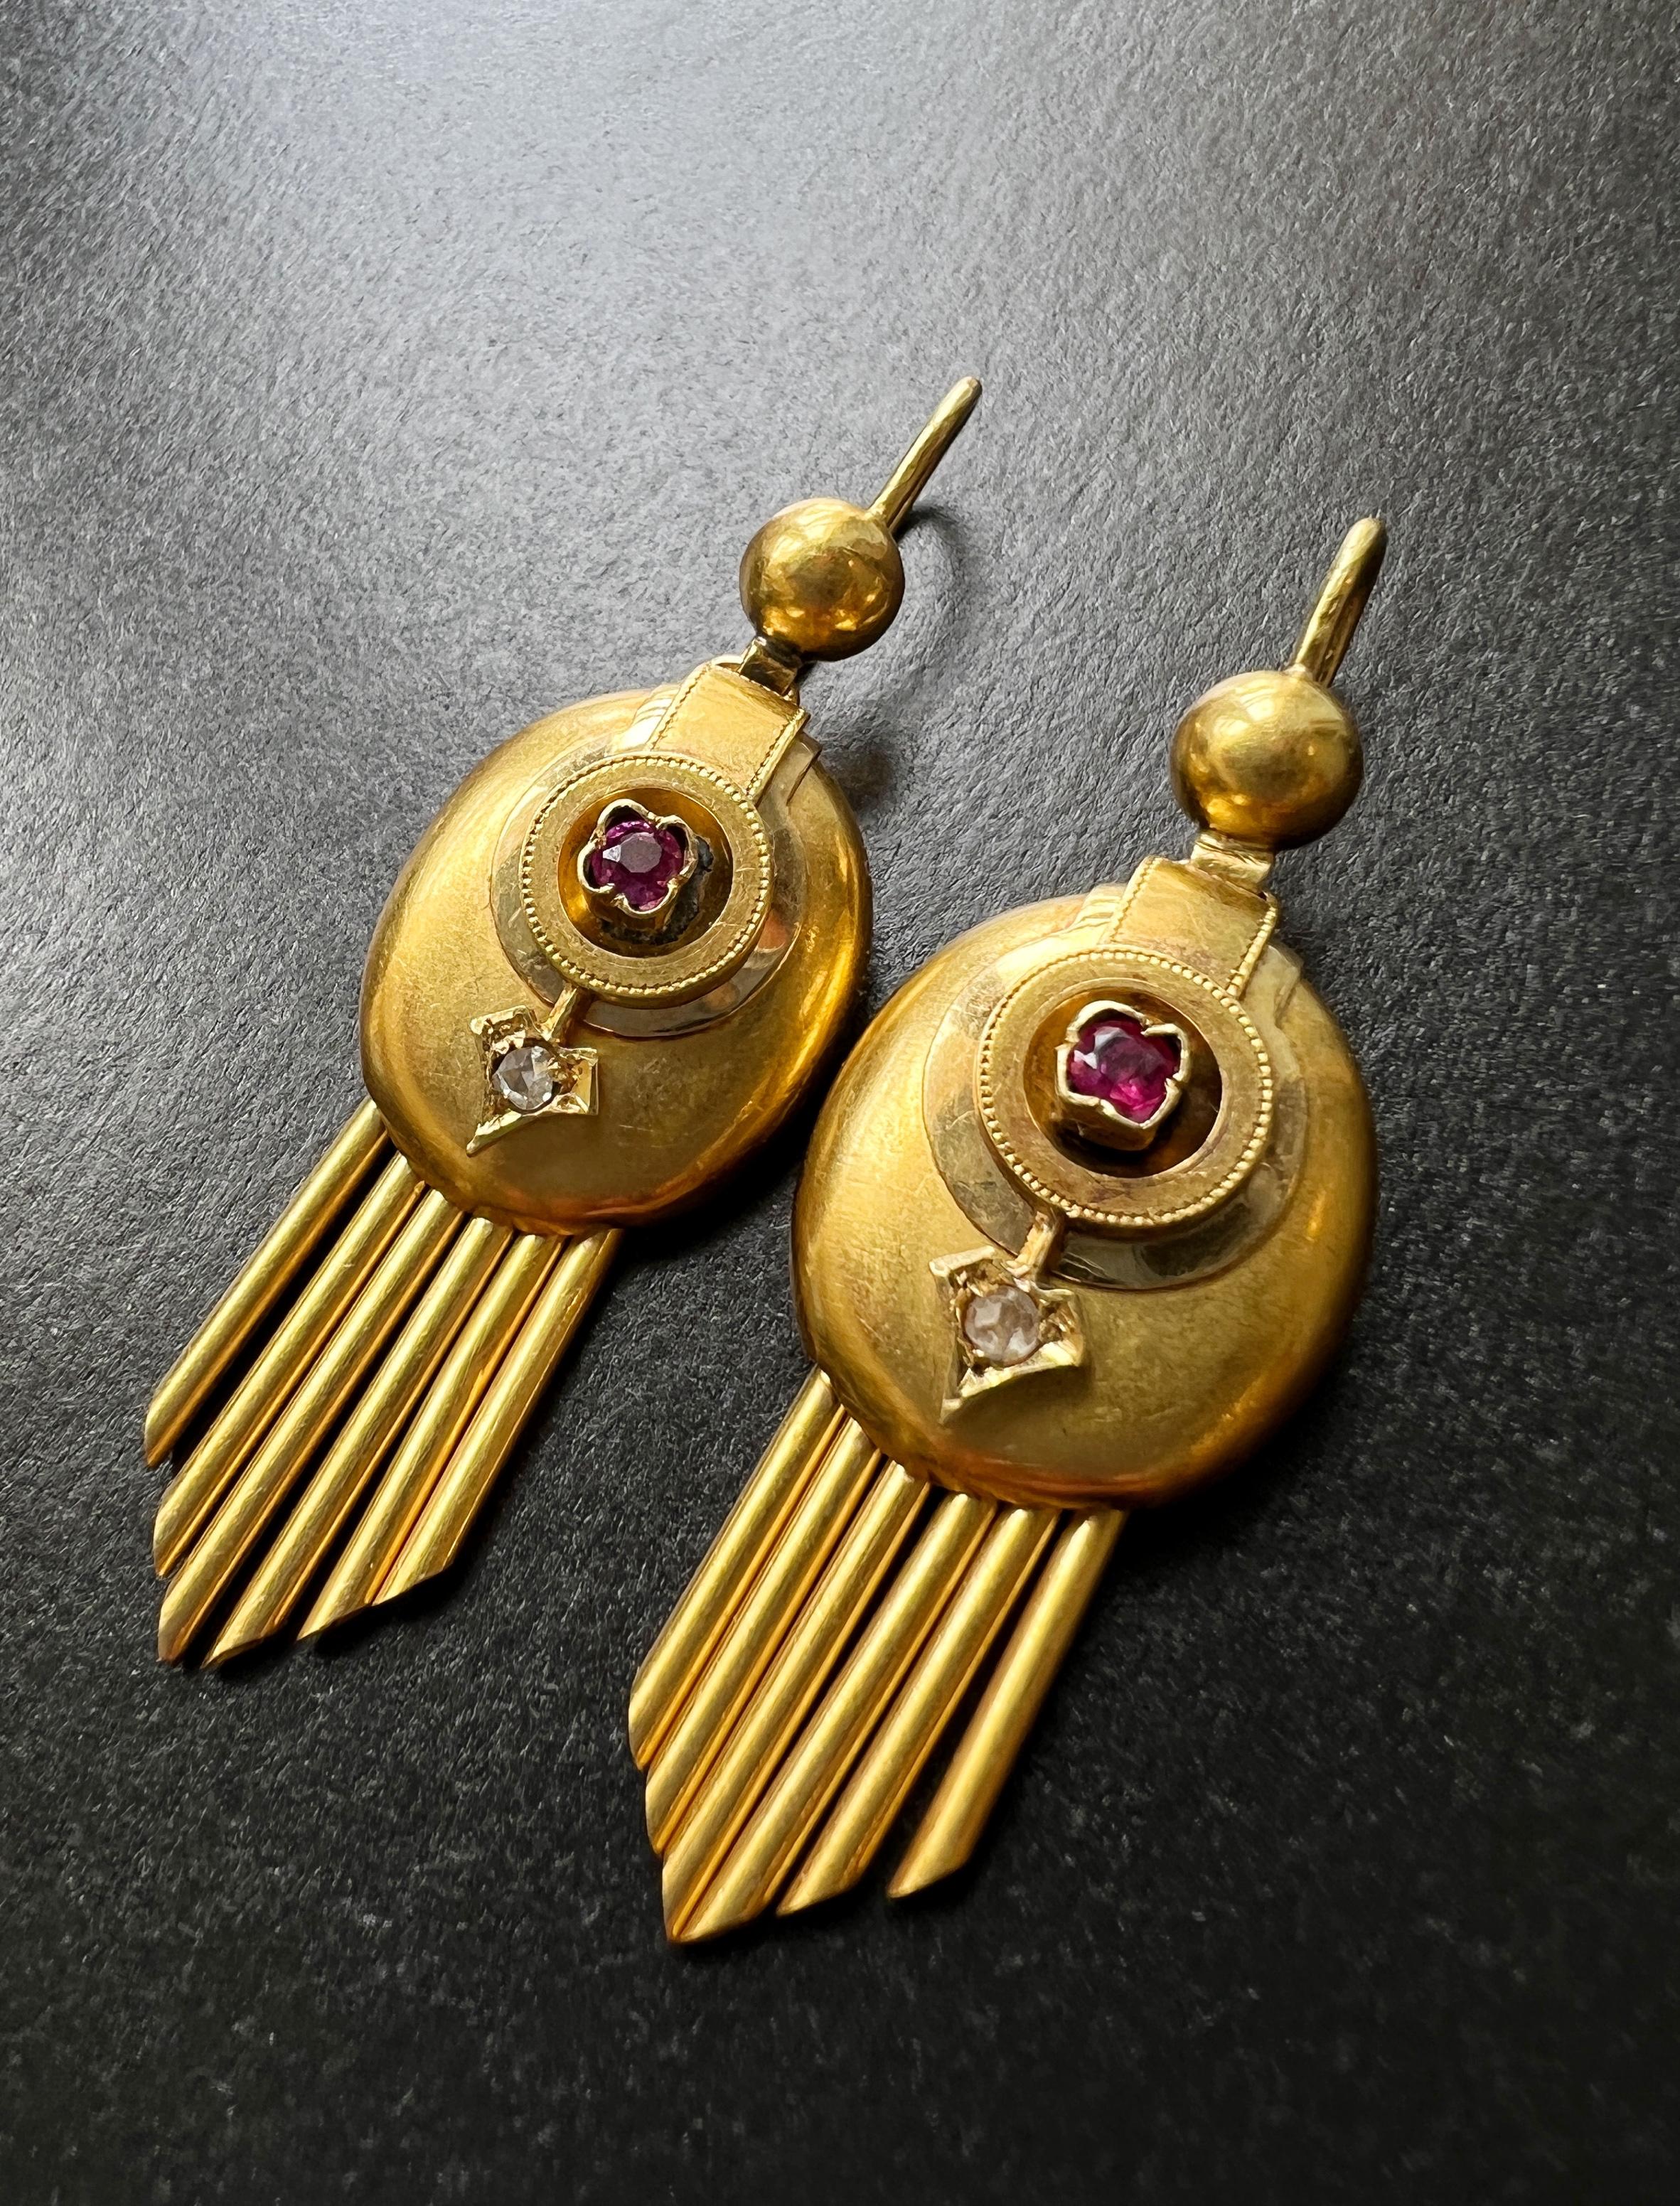 These rare antique 18K gold earrings have everything we love: originality, fine workmanship, the quality of the gems, without mentioning the clever use of the fringe which offer a lot of lightness when they move.

On the top, it features an arrow